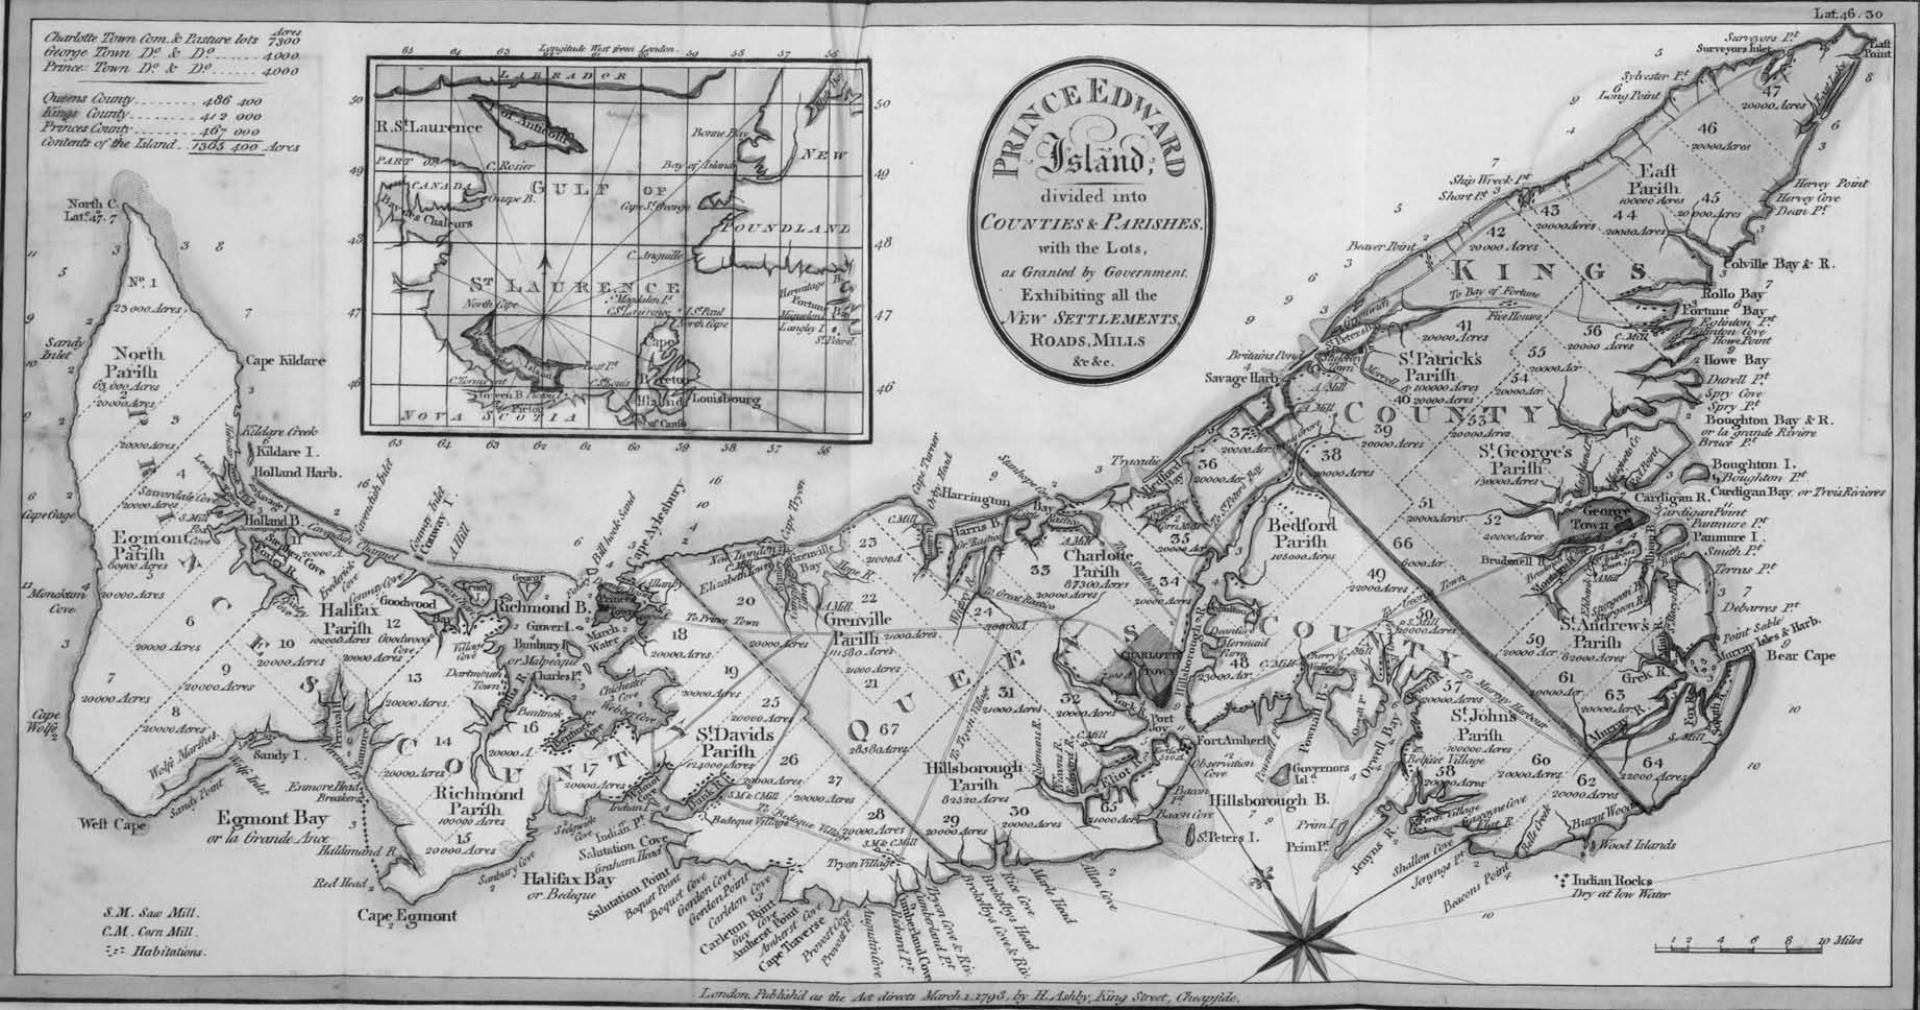 A description of Prince Edward Island, in the Gulf of St